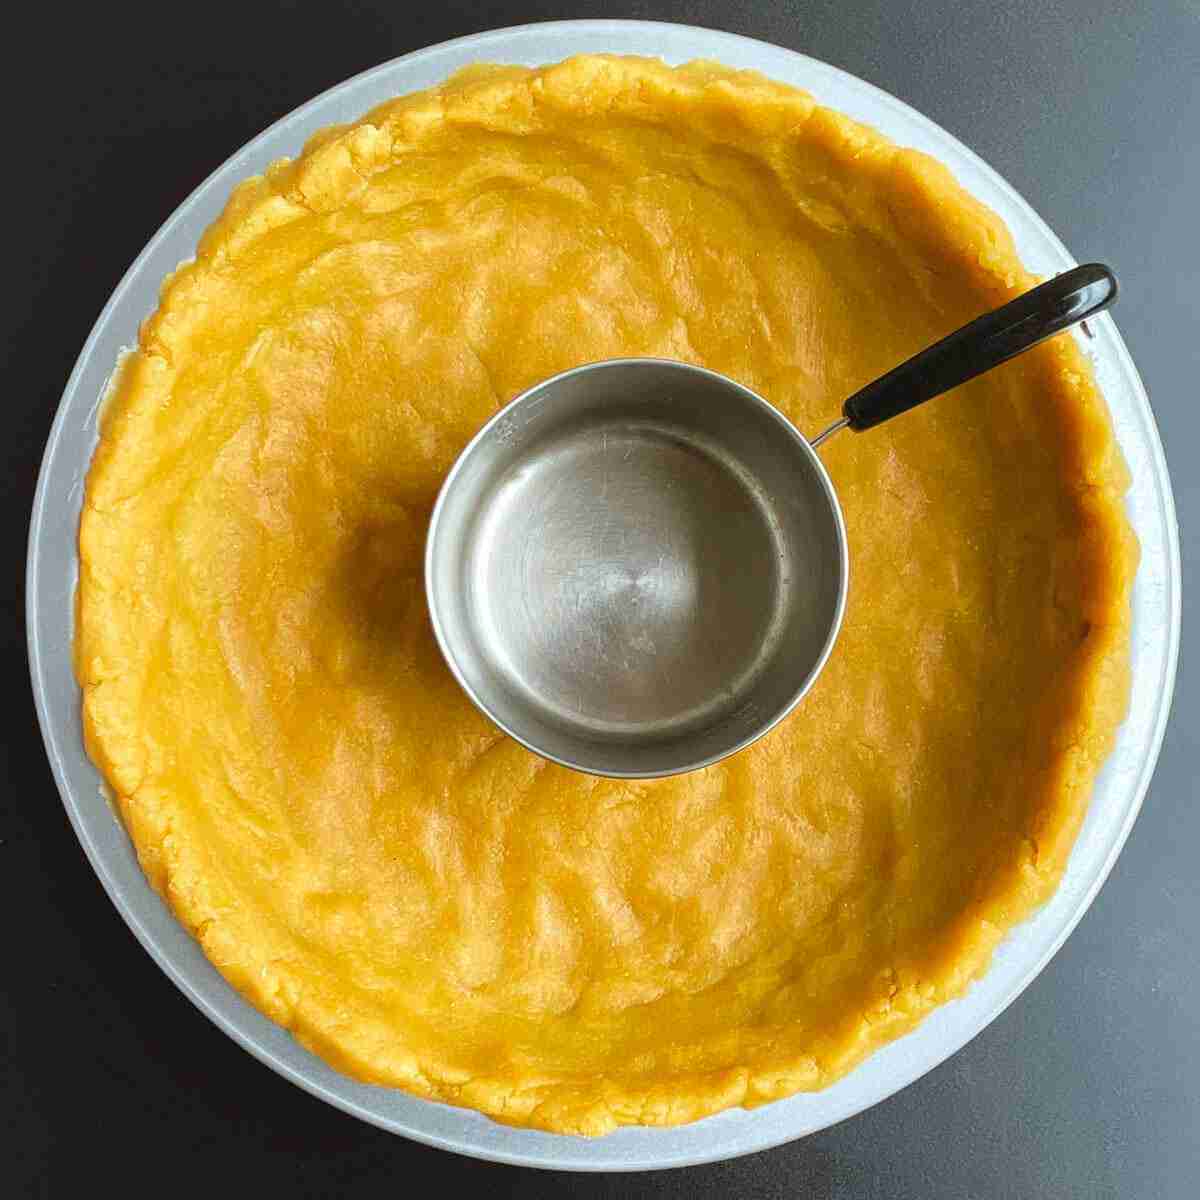 The image illustrates how to use a mini saucepan to flatten the bottom of the chickpea quiche crust and build the sides.